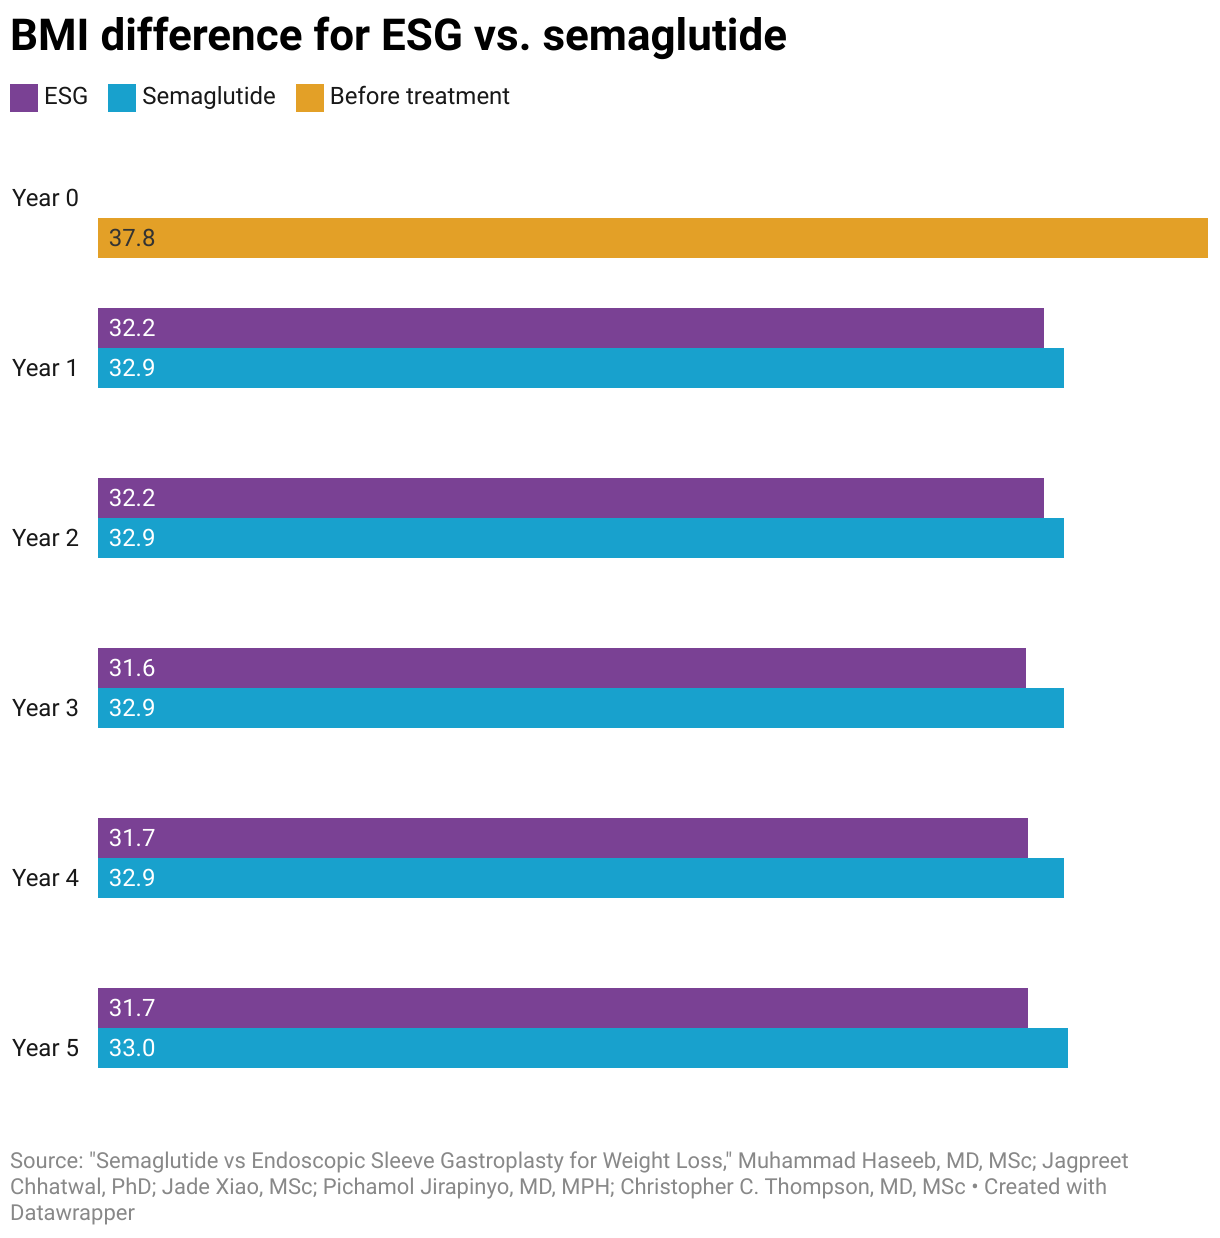 BMI for ESG is lower than BMI rates for Semaglutide. 